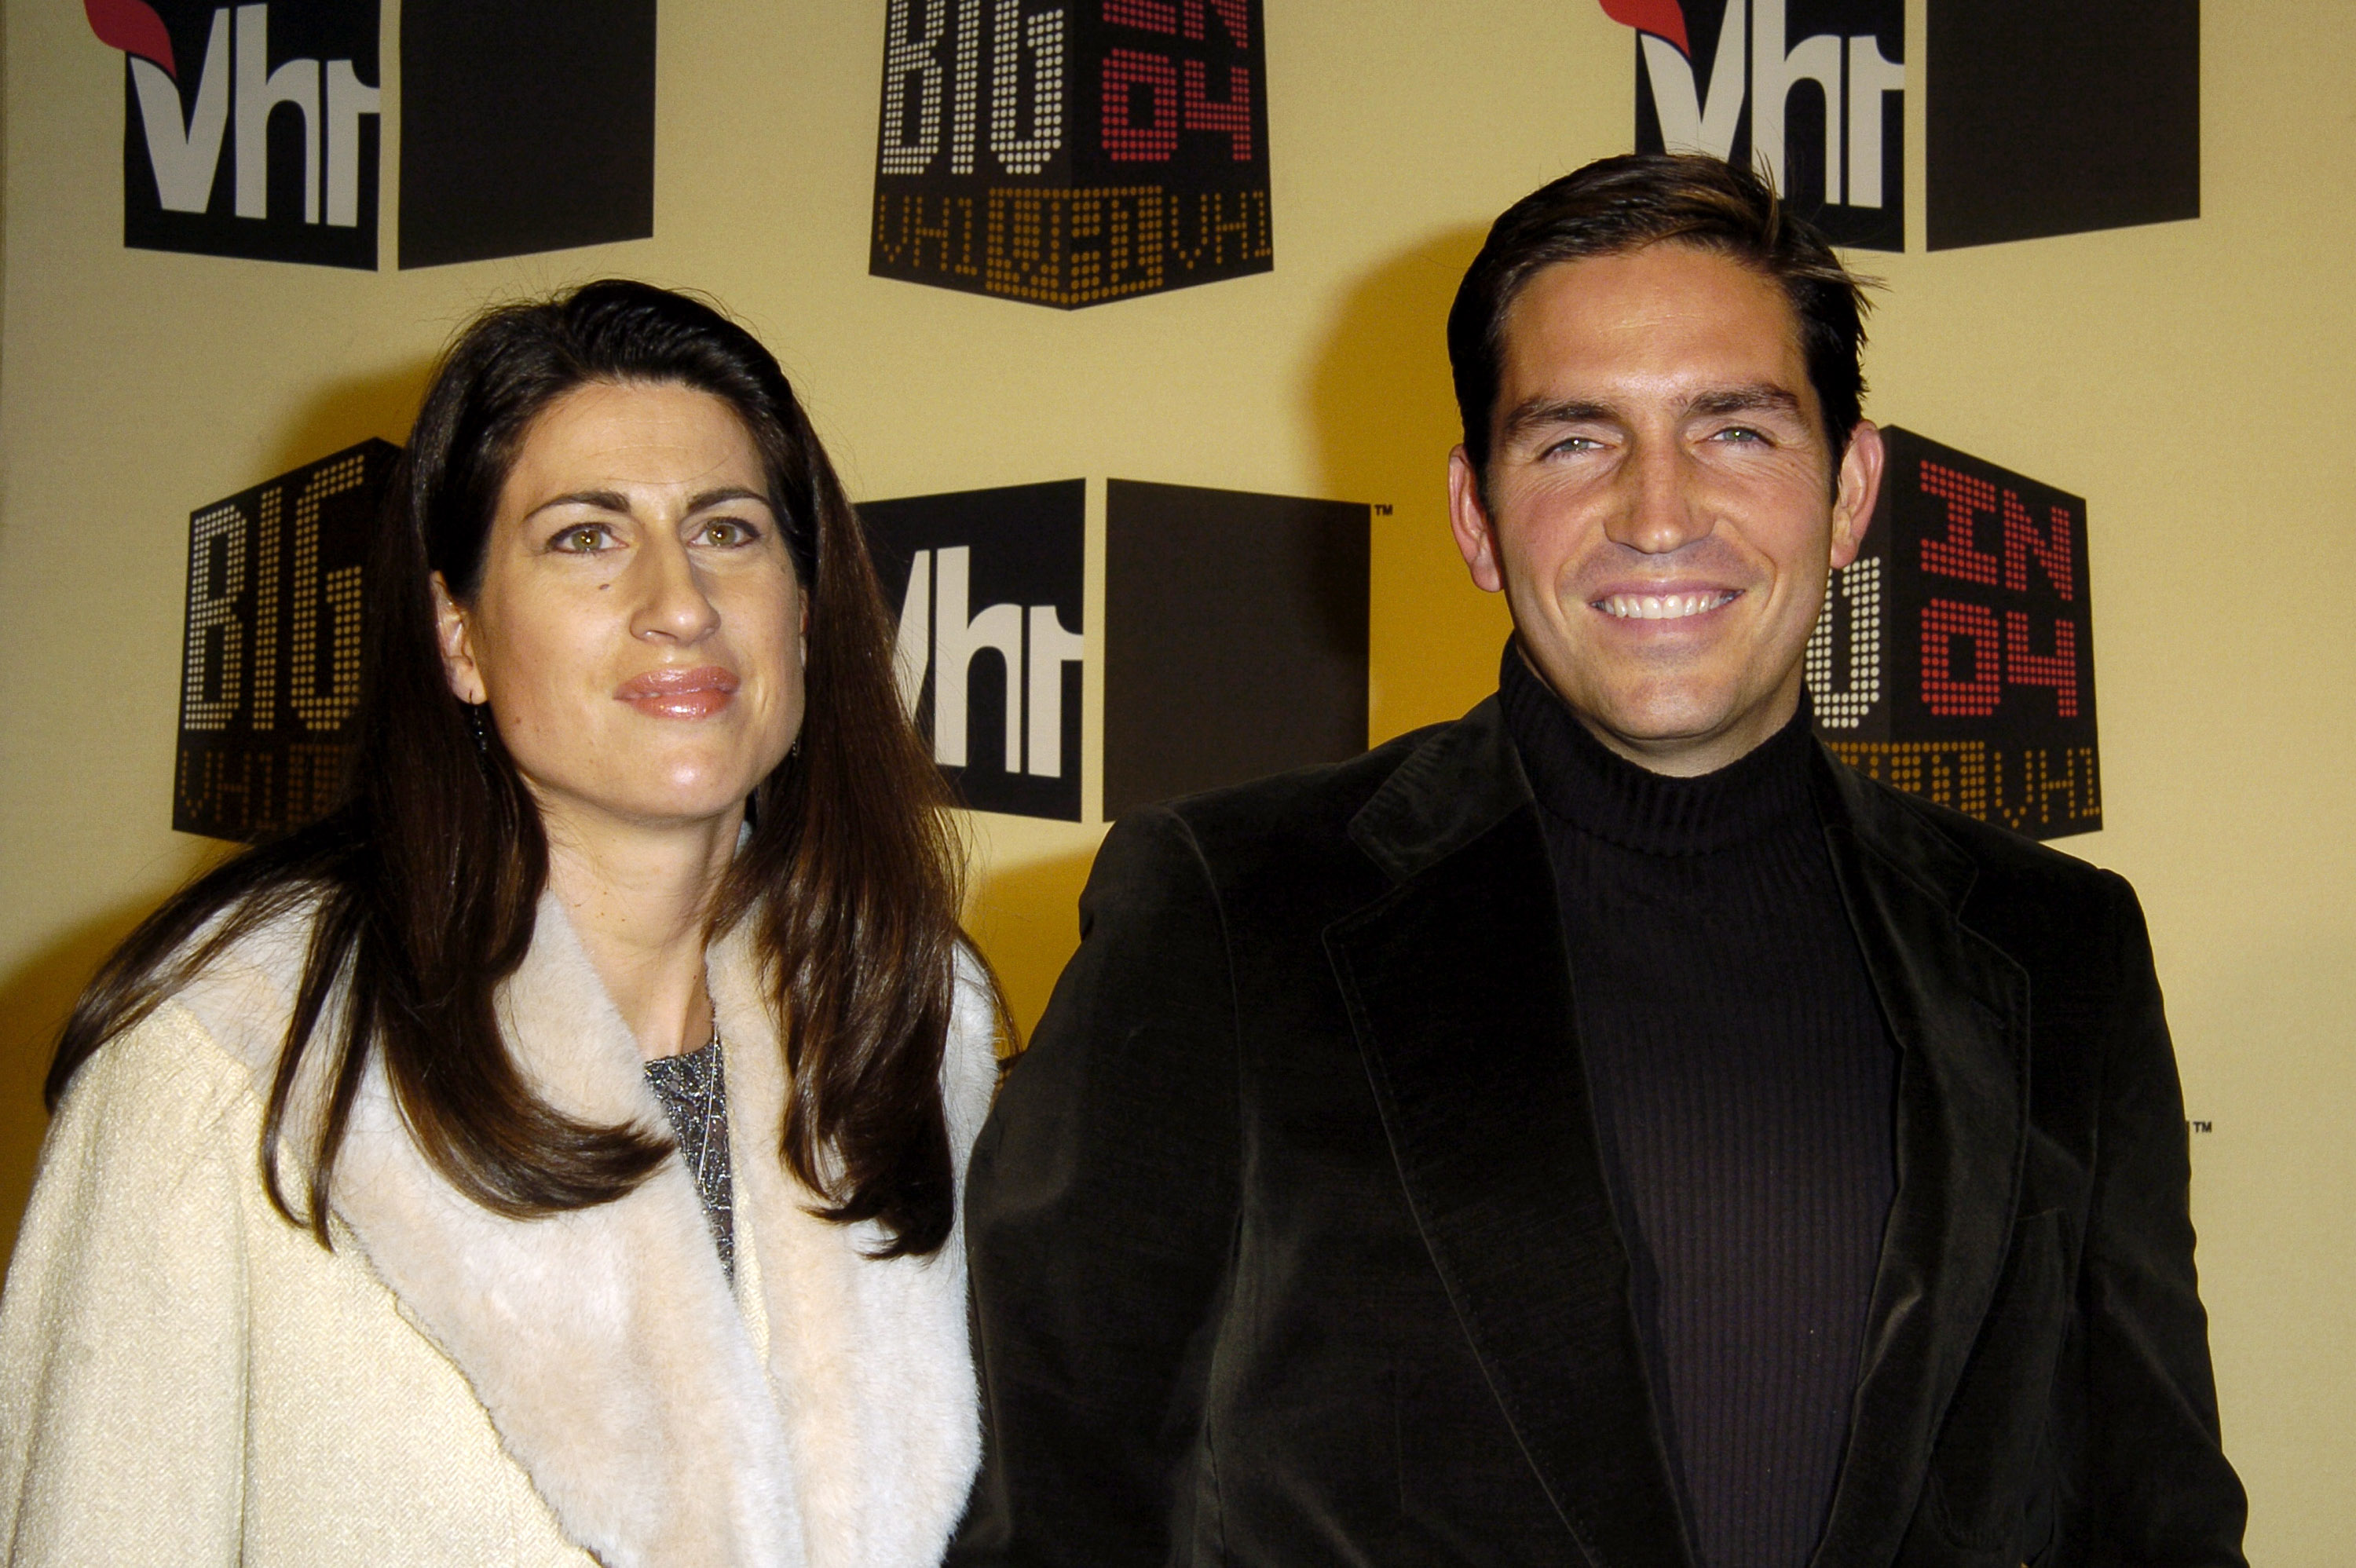 Jim Caviezel and his wife Kerri Browitt Caviezel attend the VH1 Big in '04 - Arrivals at Shrine Auditorium in December 2004 in Los Angeles, California. | Source: Getty Images